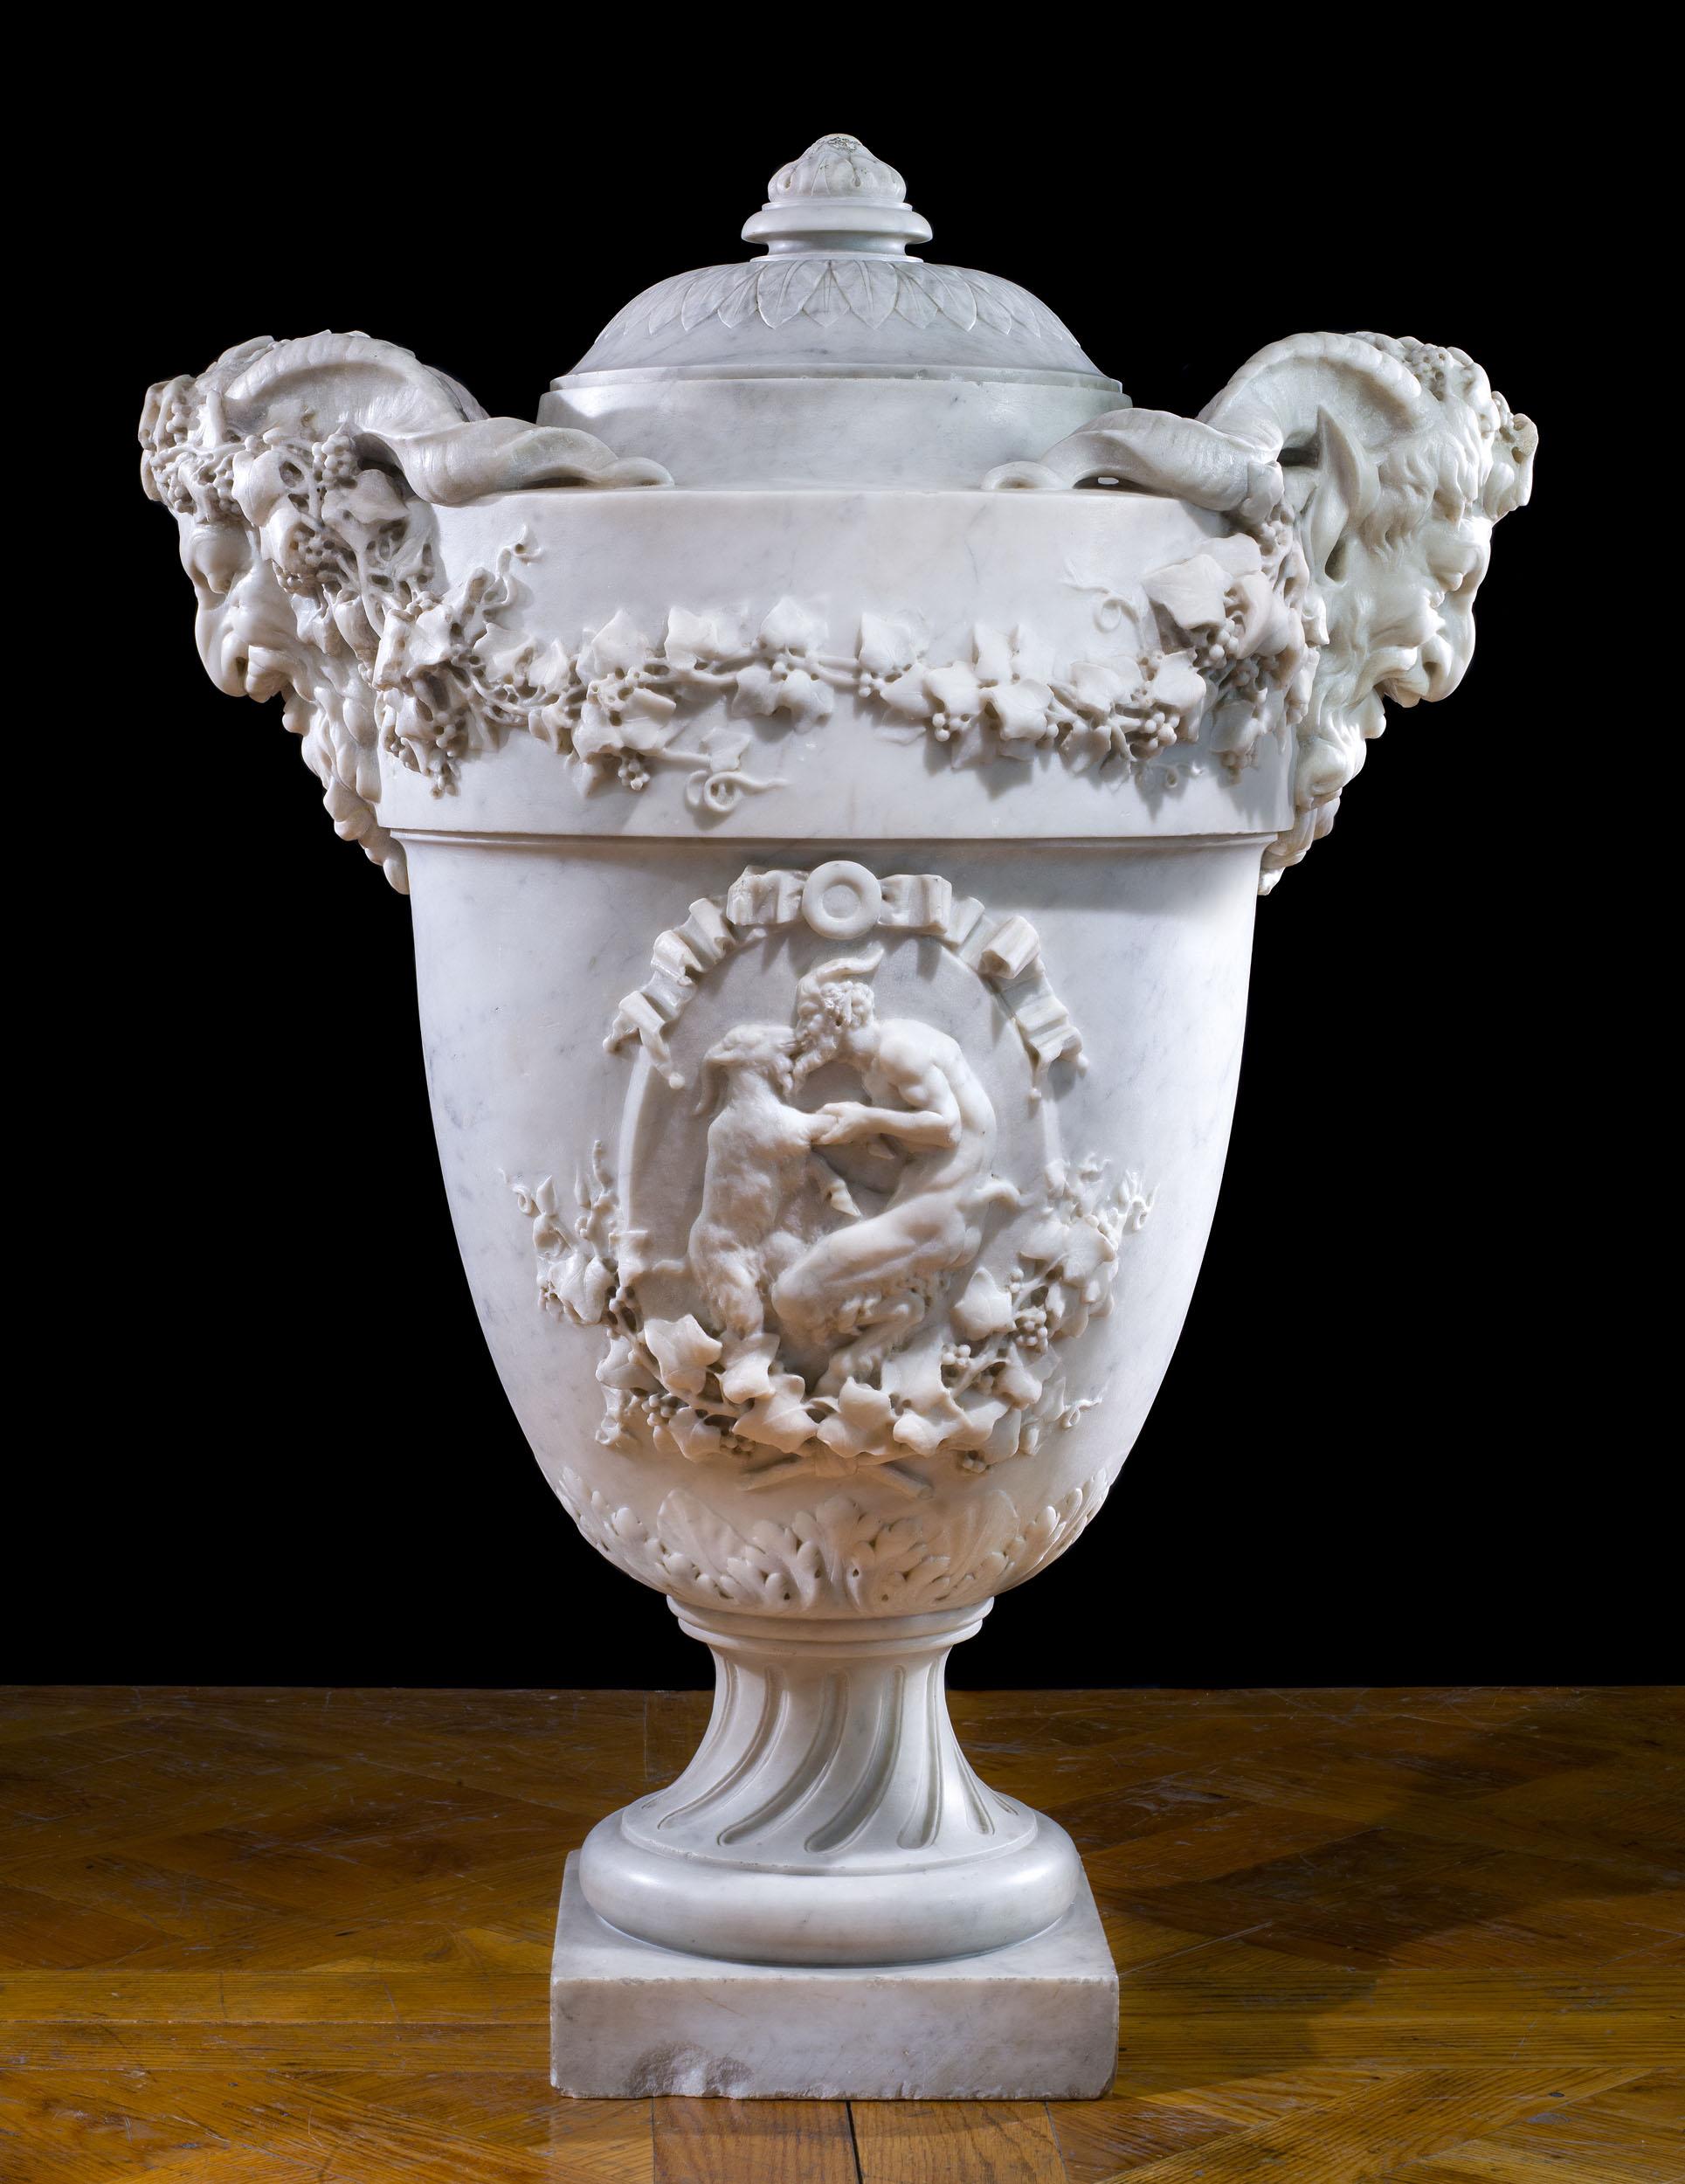 A large and finely carved 19th century Italian marble lidded urn, decorated with trailing grape vines and and dramatic handles, modelled as grinning and horned satyrs. The body of the urn is carved with two cartouches, one depicting a nymph bathing